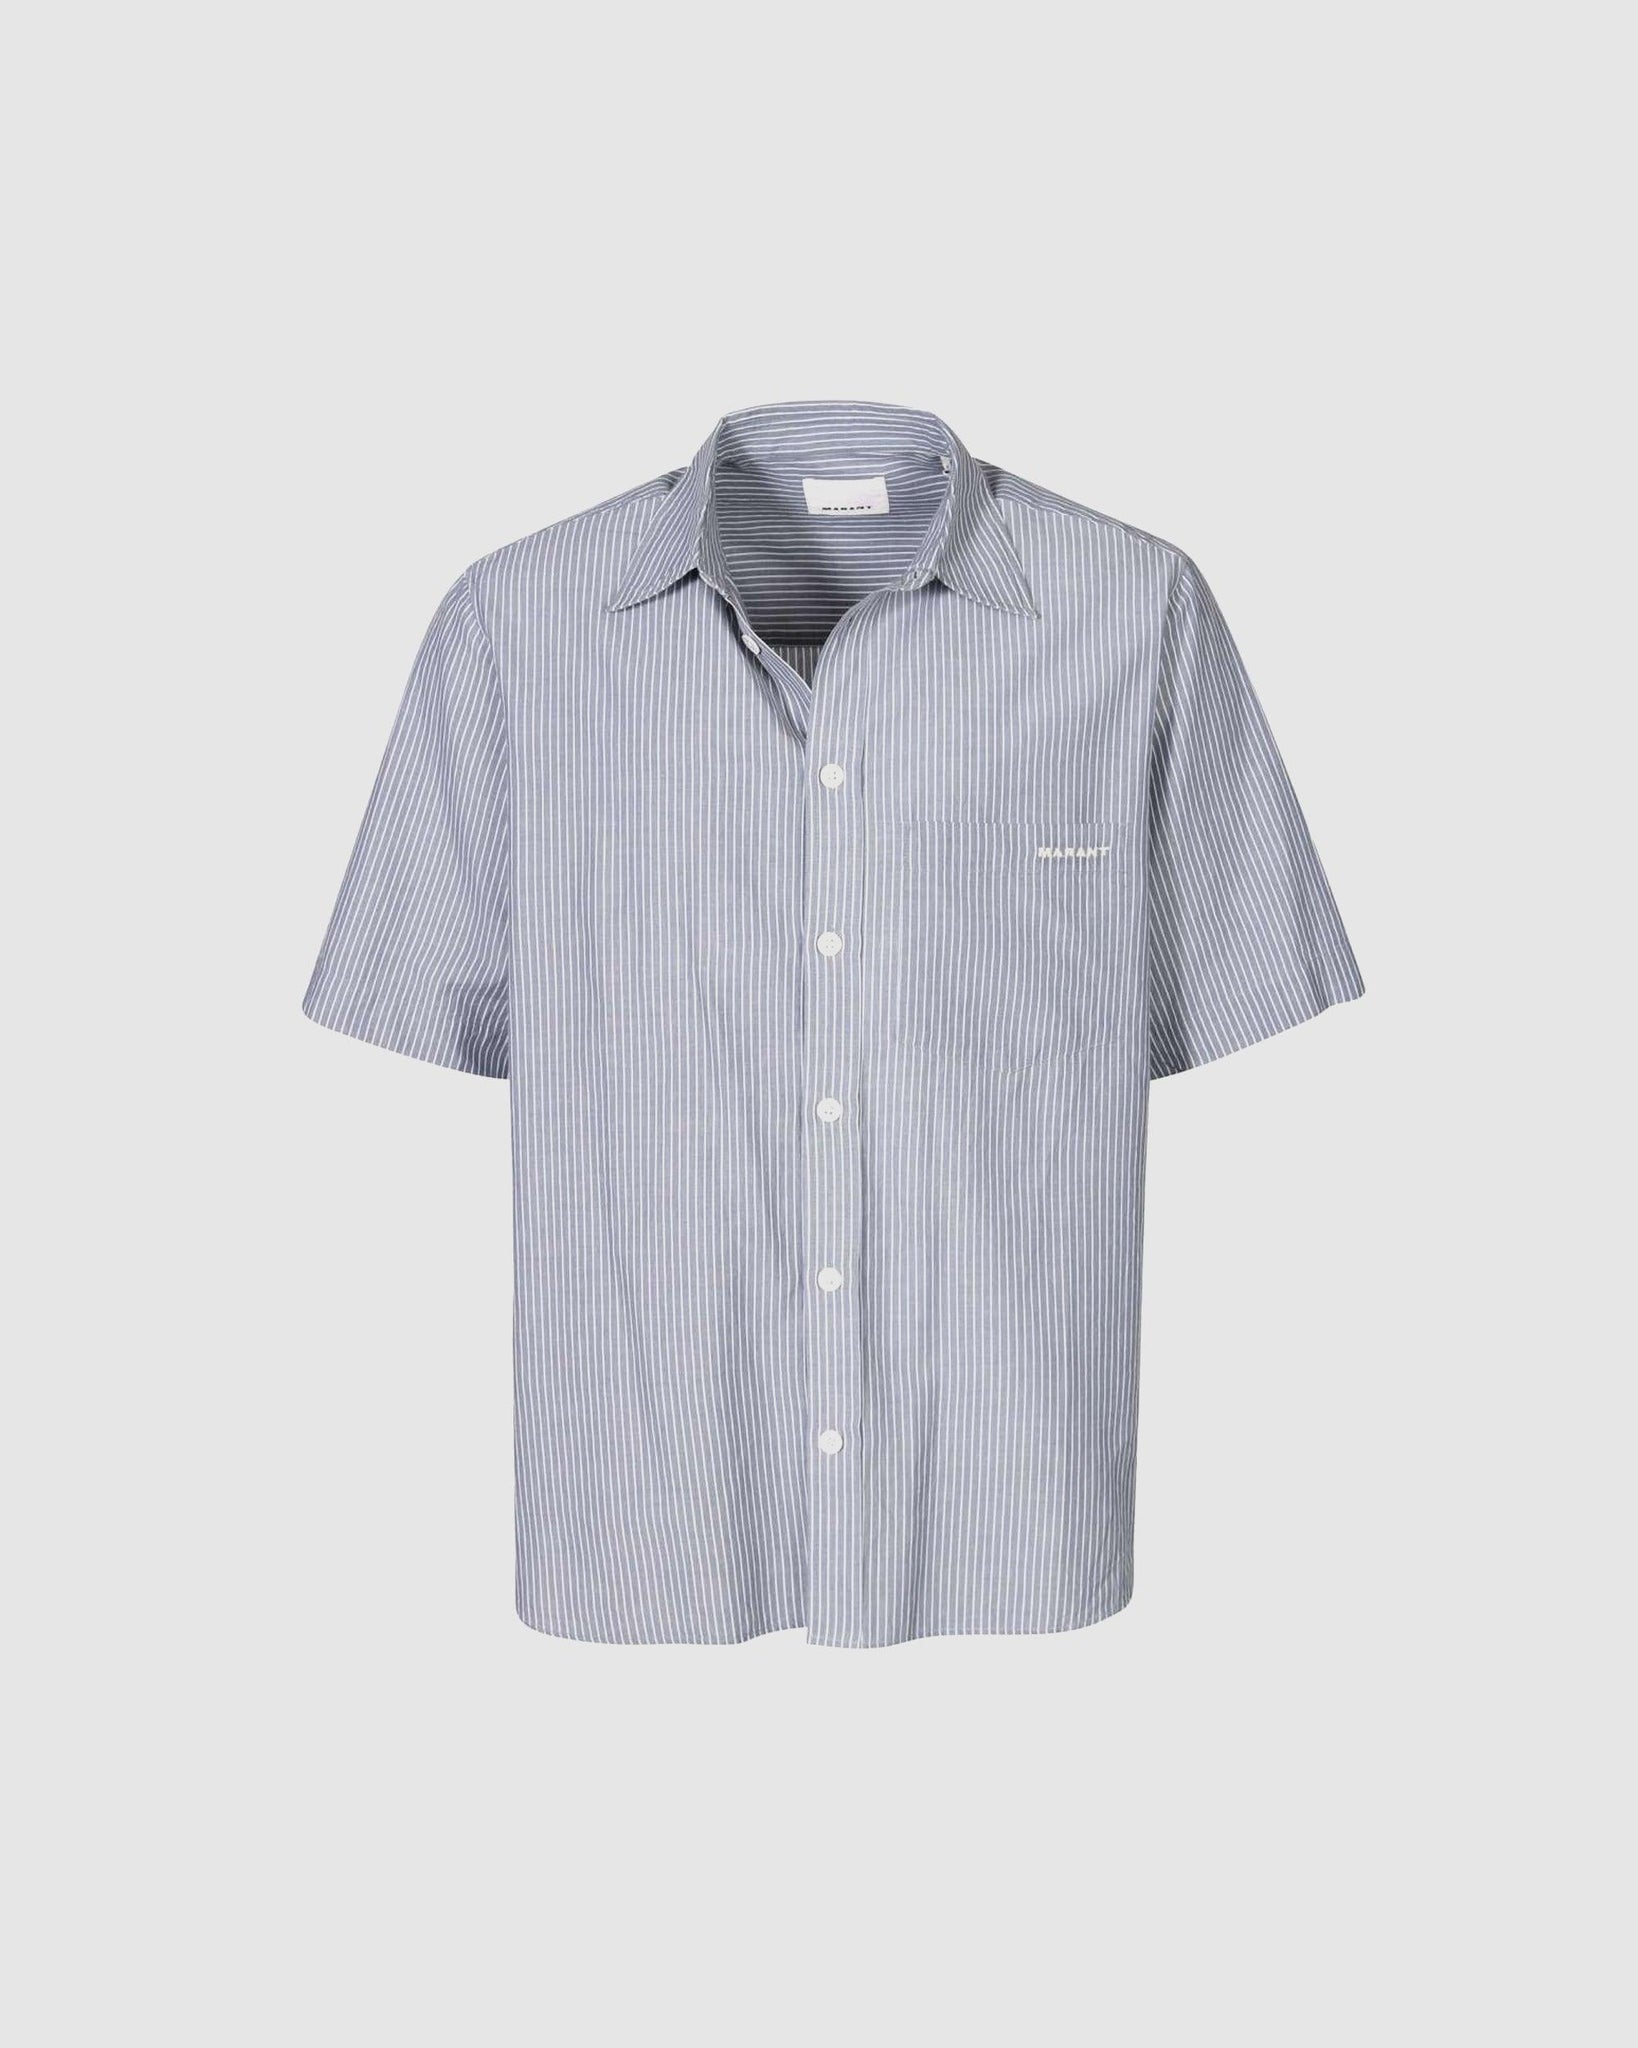 Labilio Shirt - {{ collection.title }} - Chinatown Country Club 